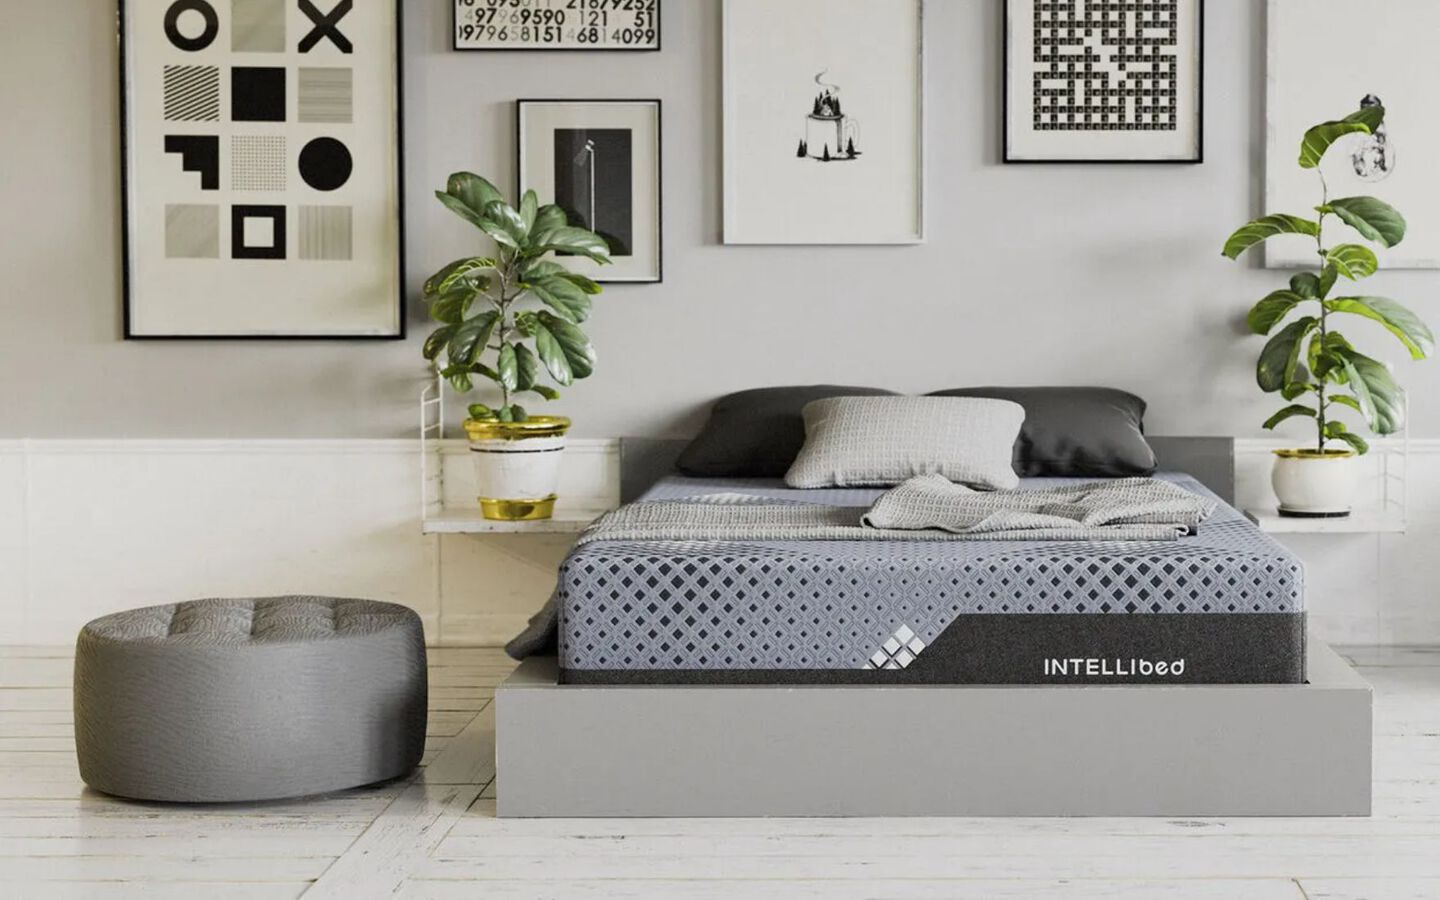 Bedroom with Intellibed mattress on a grey bedframe and two plants